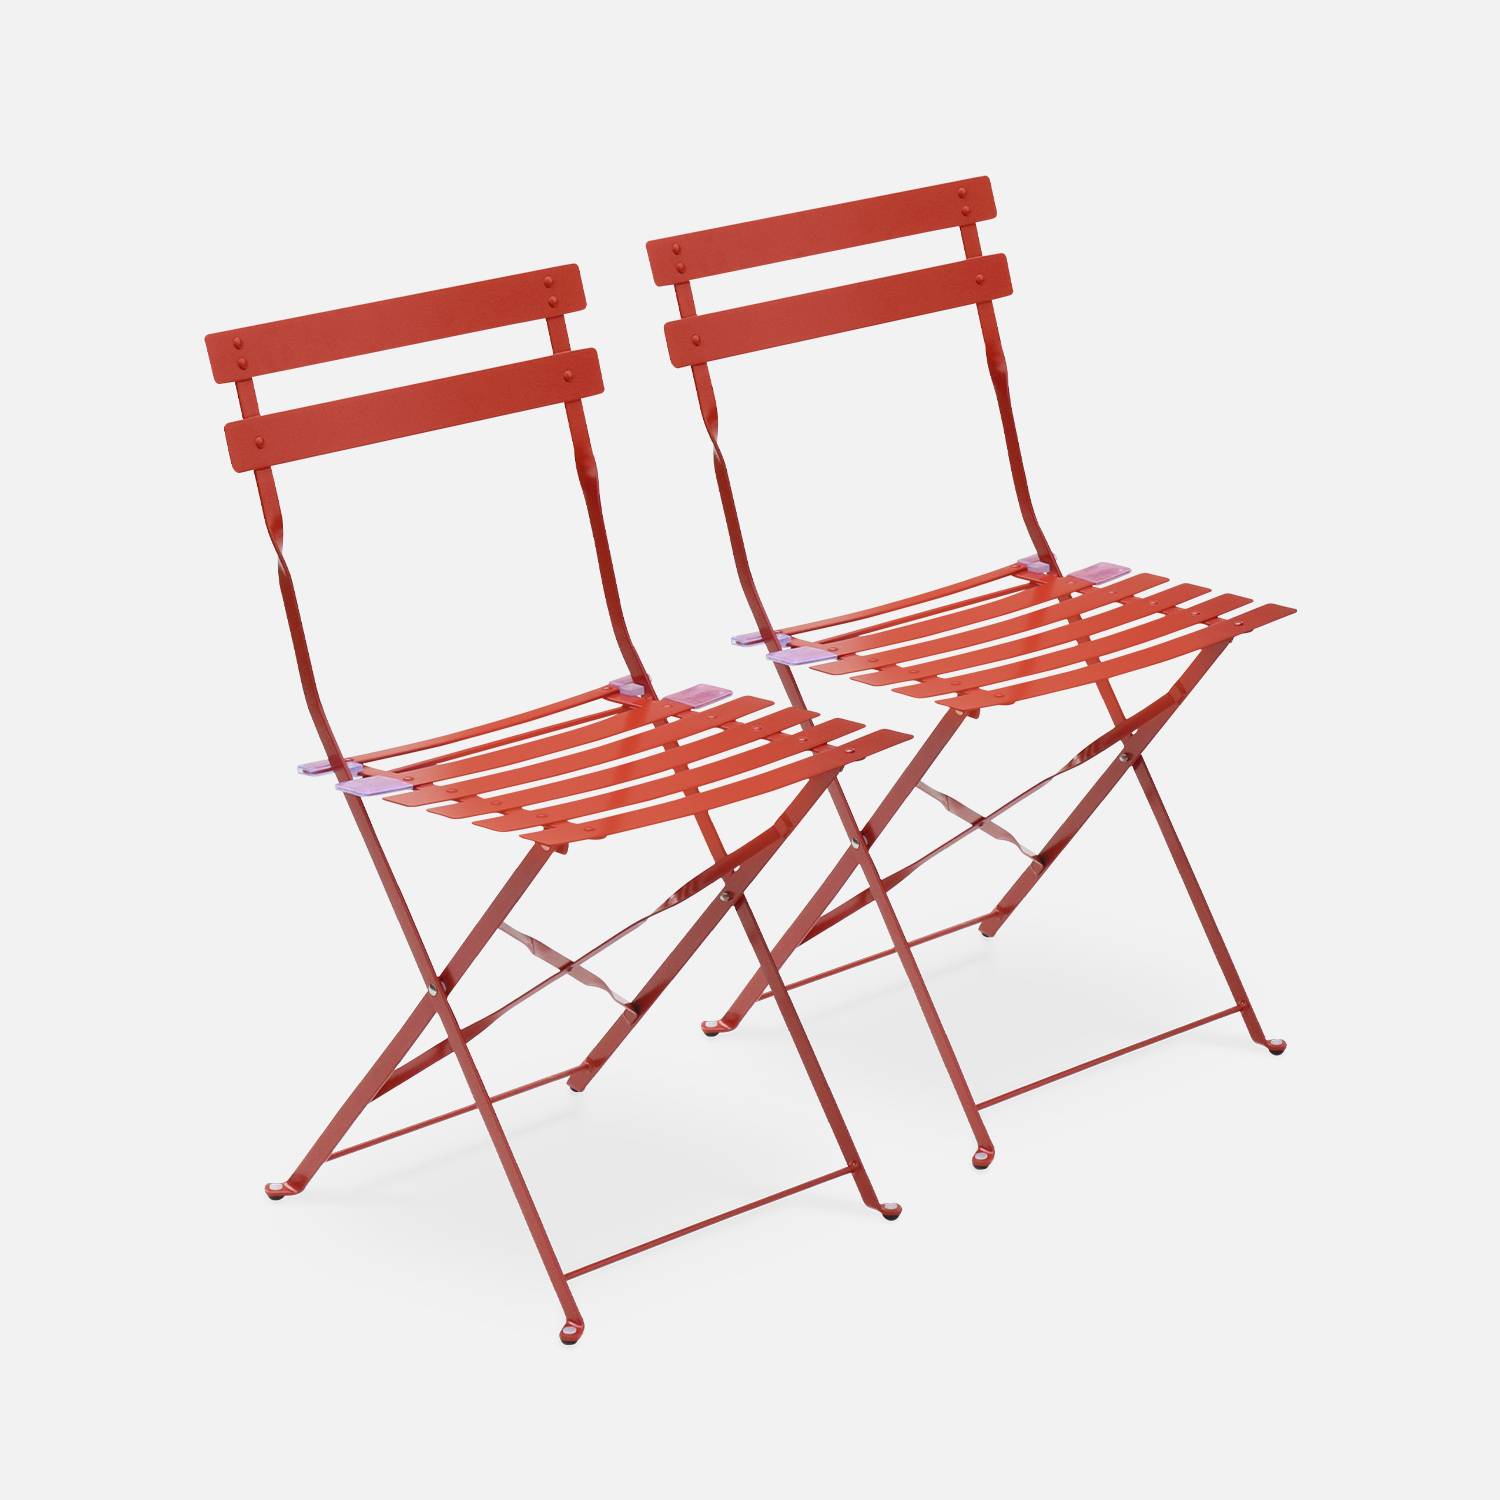 Set of 2 foldable bistro chairs - Emilia terracotta - Thermo-lacquered steel | sweeek